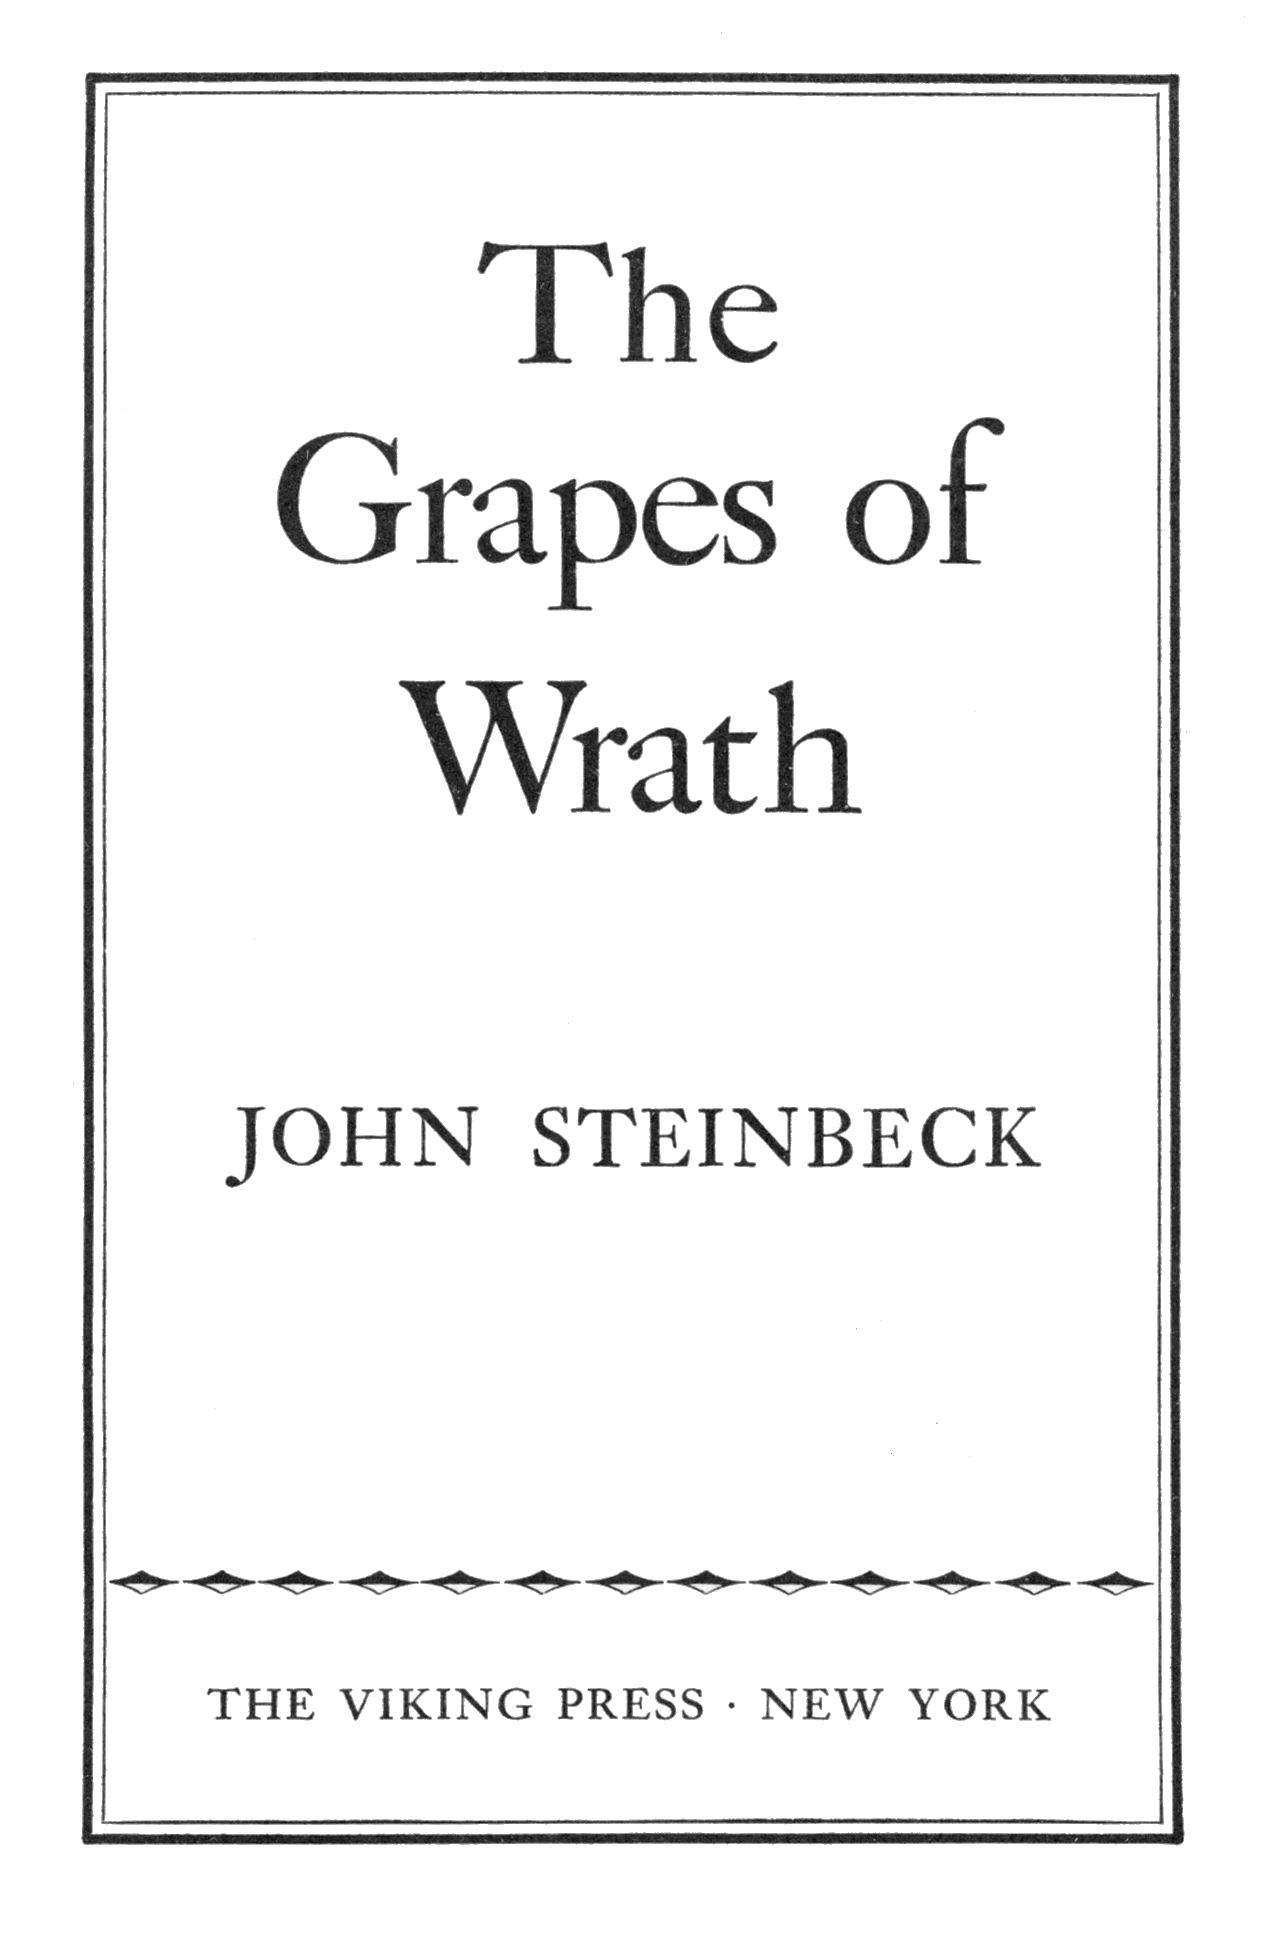 The Distributed Proofreaders Canada eBook of The Grapes of Wrath by John  Steinbeck